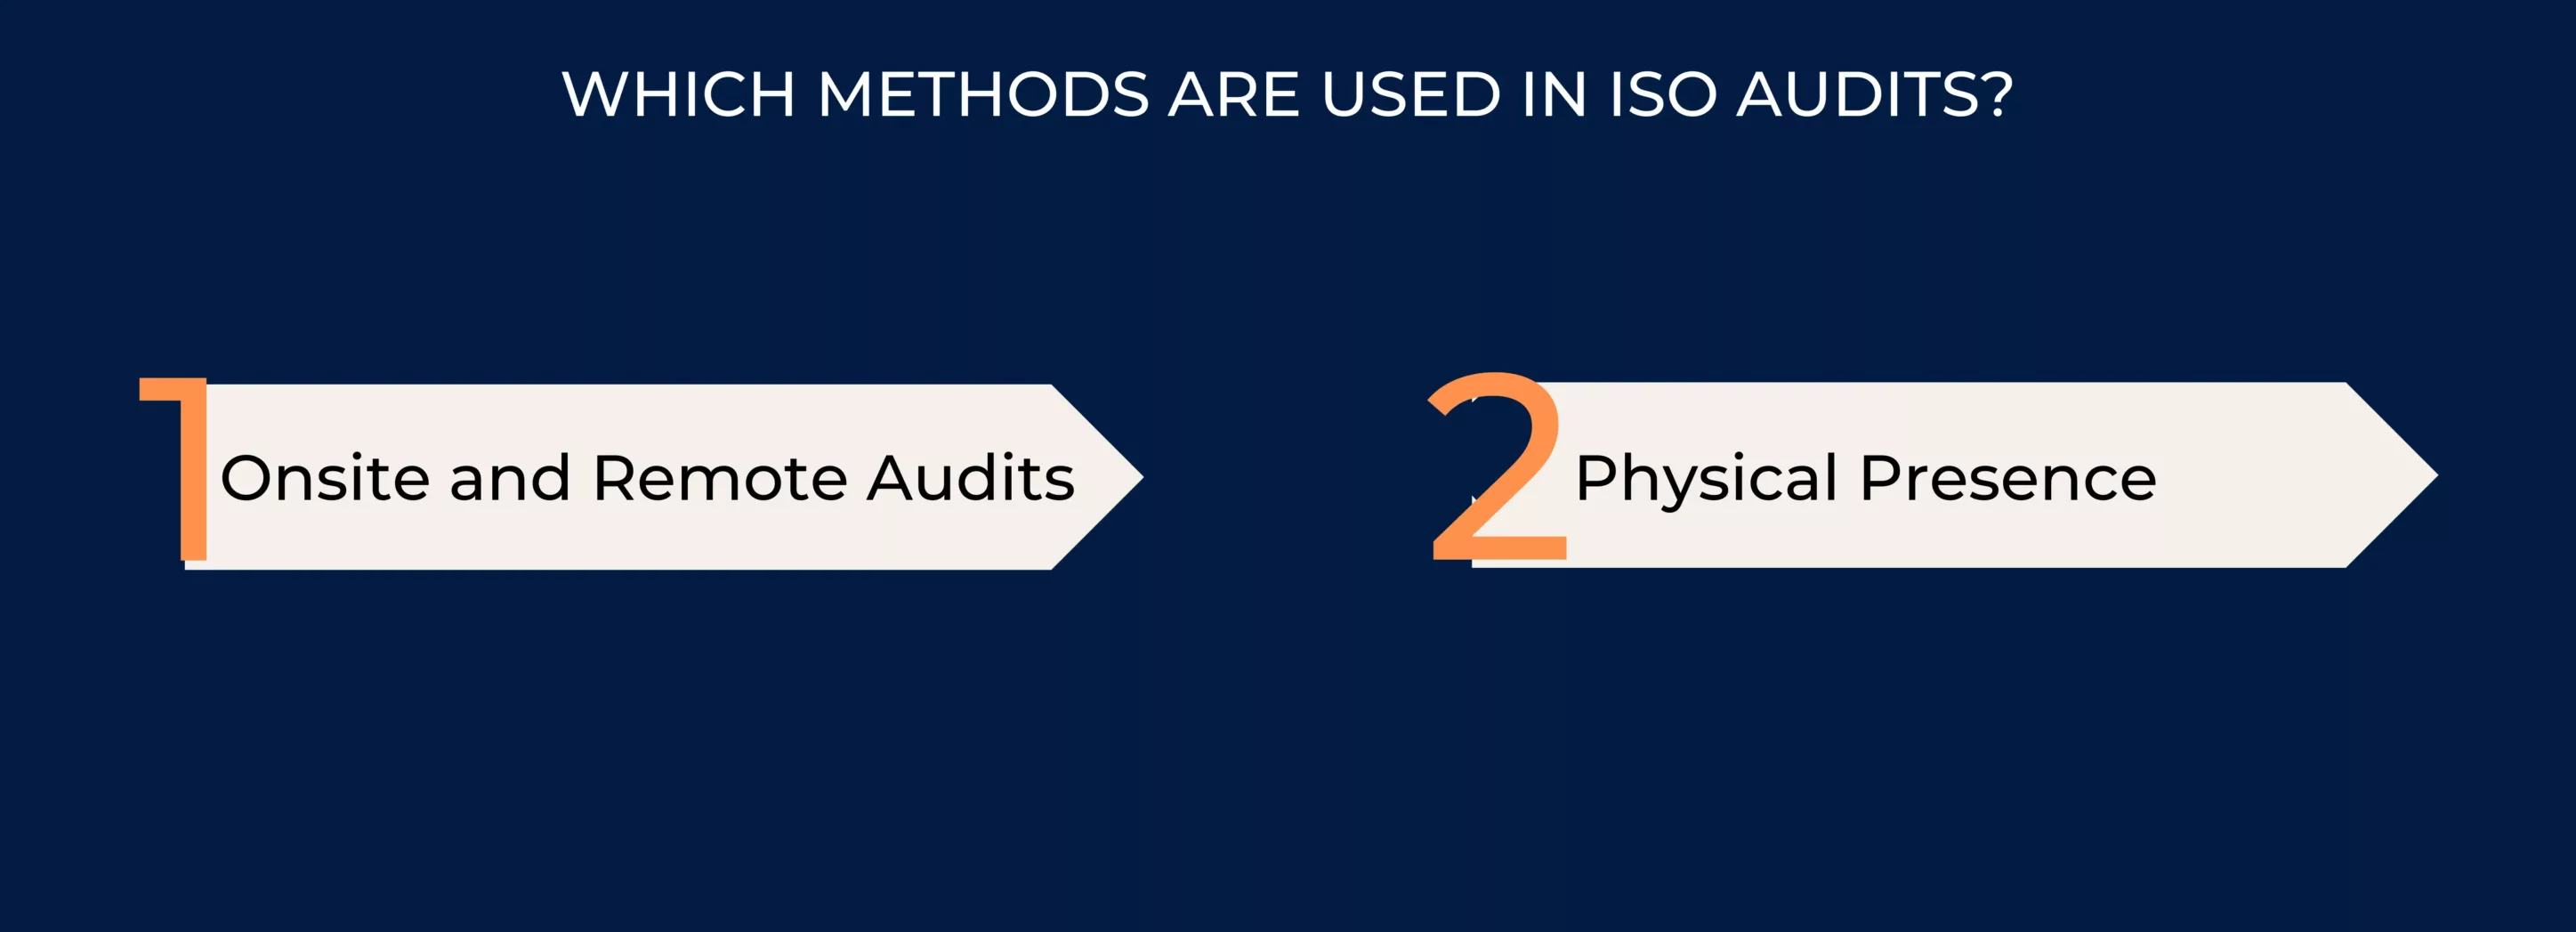 METHODS USED IN ISO AUDITS